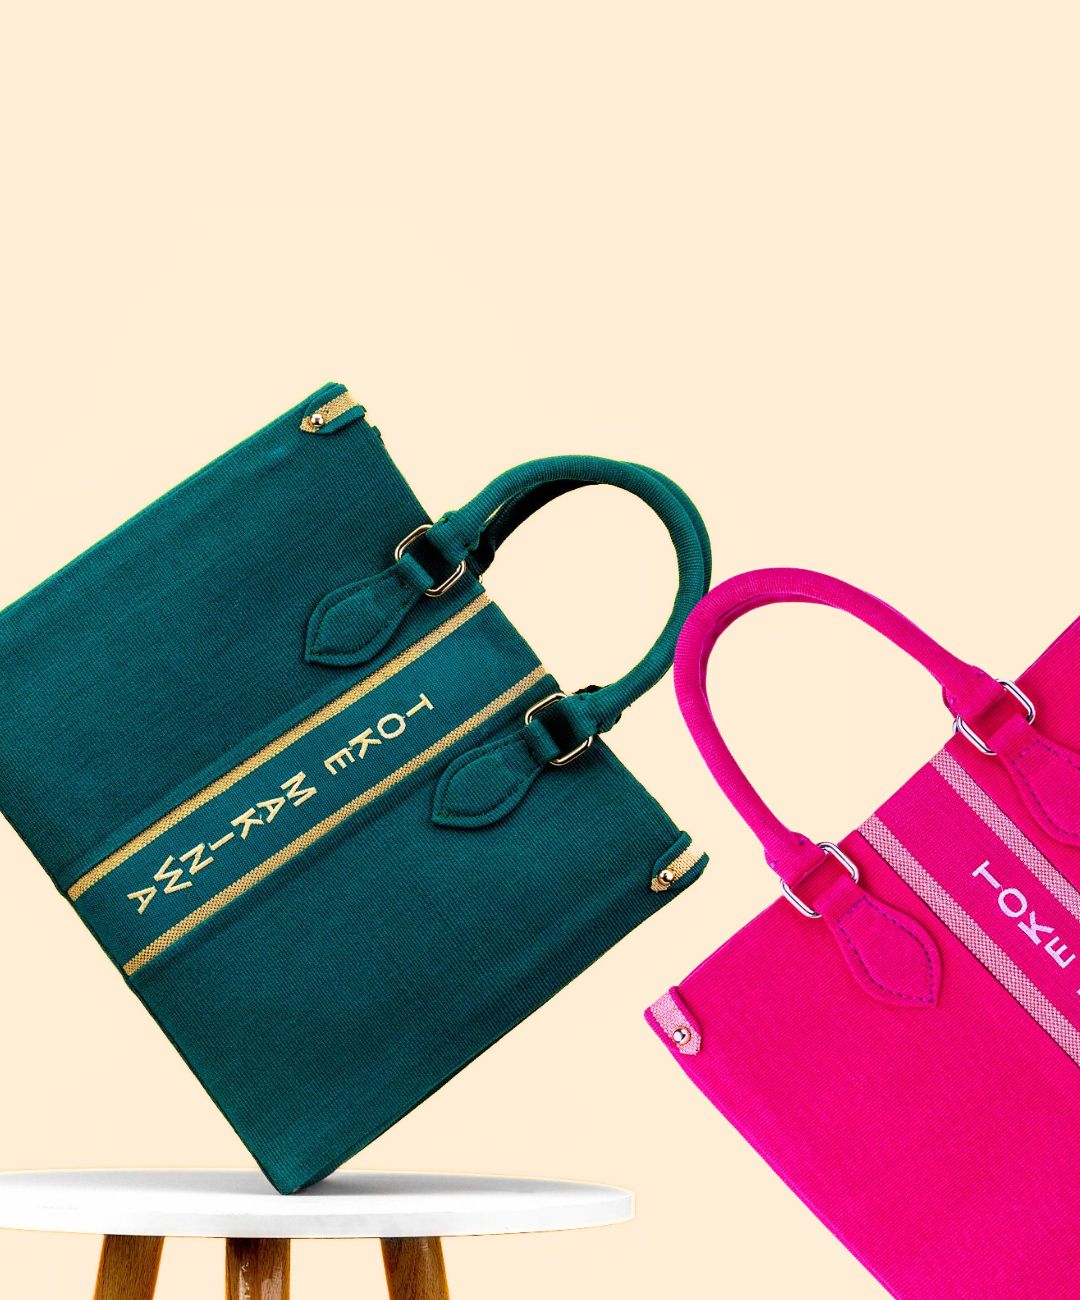 Toke Makinwa's TM Luxury bags should be getting more than a makeover - The  September Standard